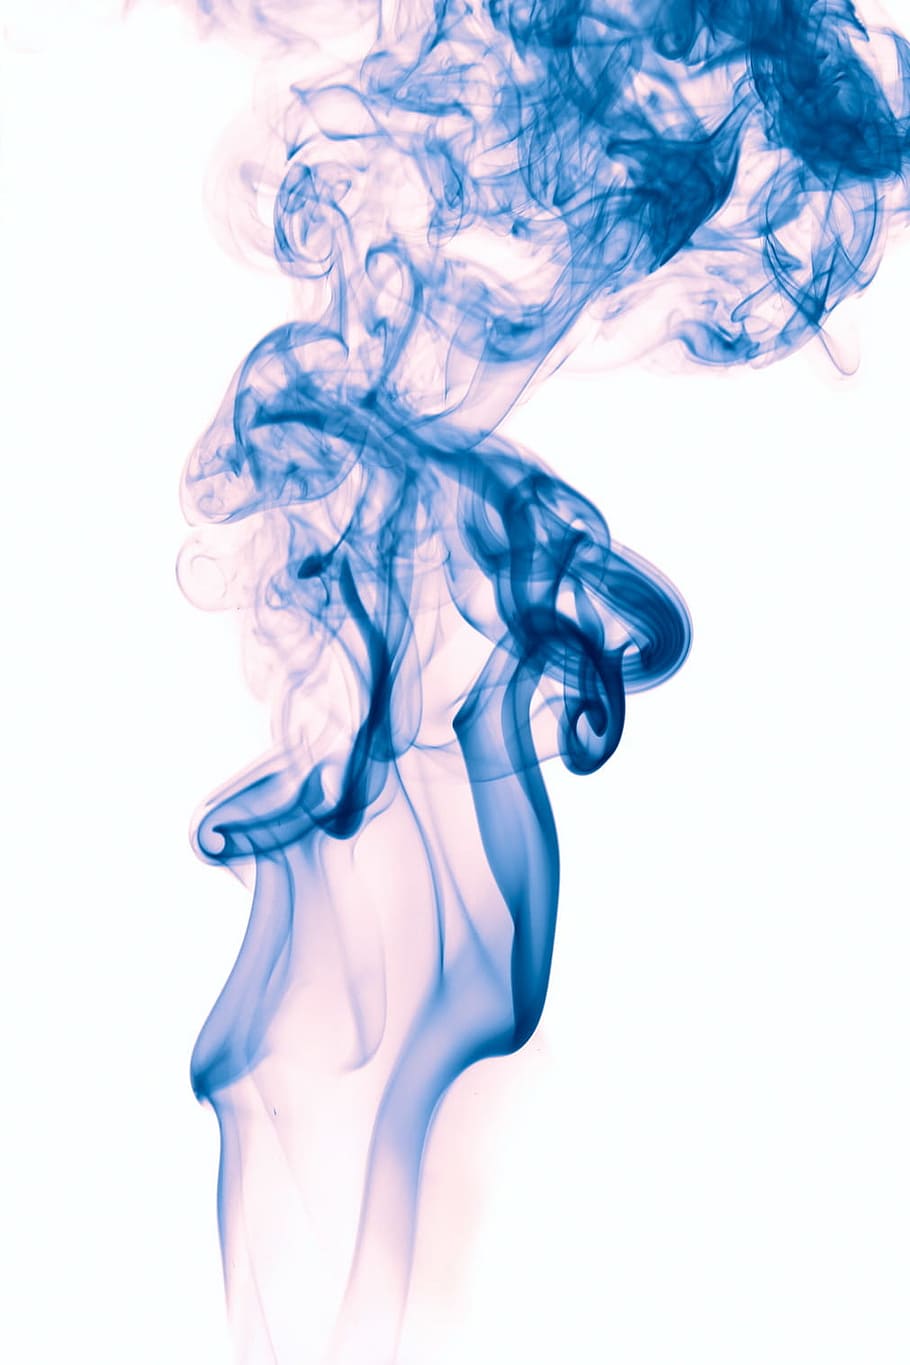 abstract, air, aroma, art, backdrop, background, blue, burning, color, concept